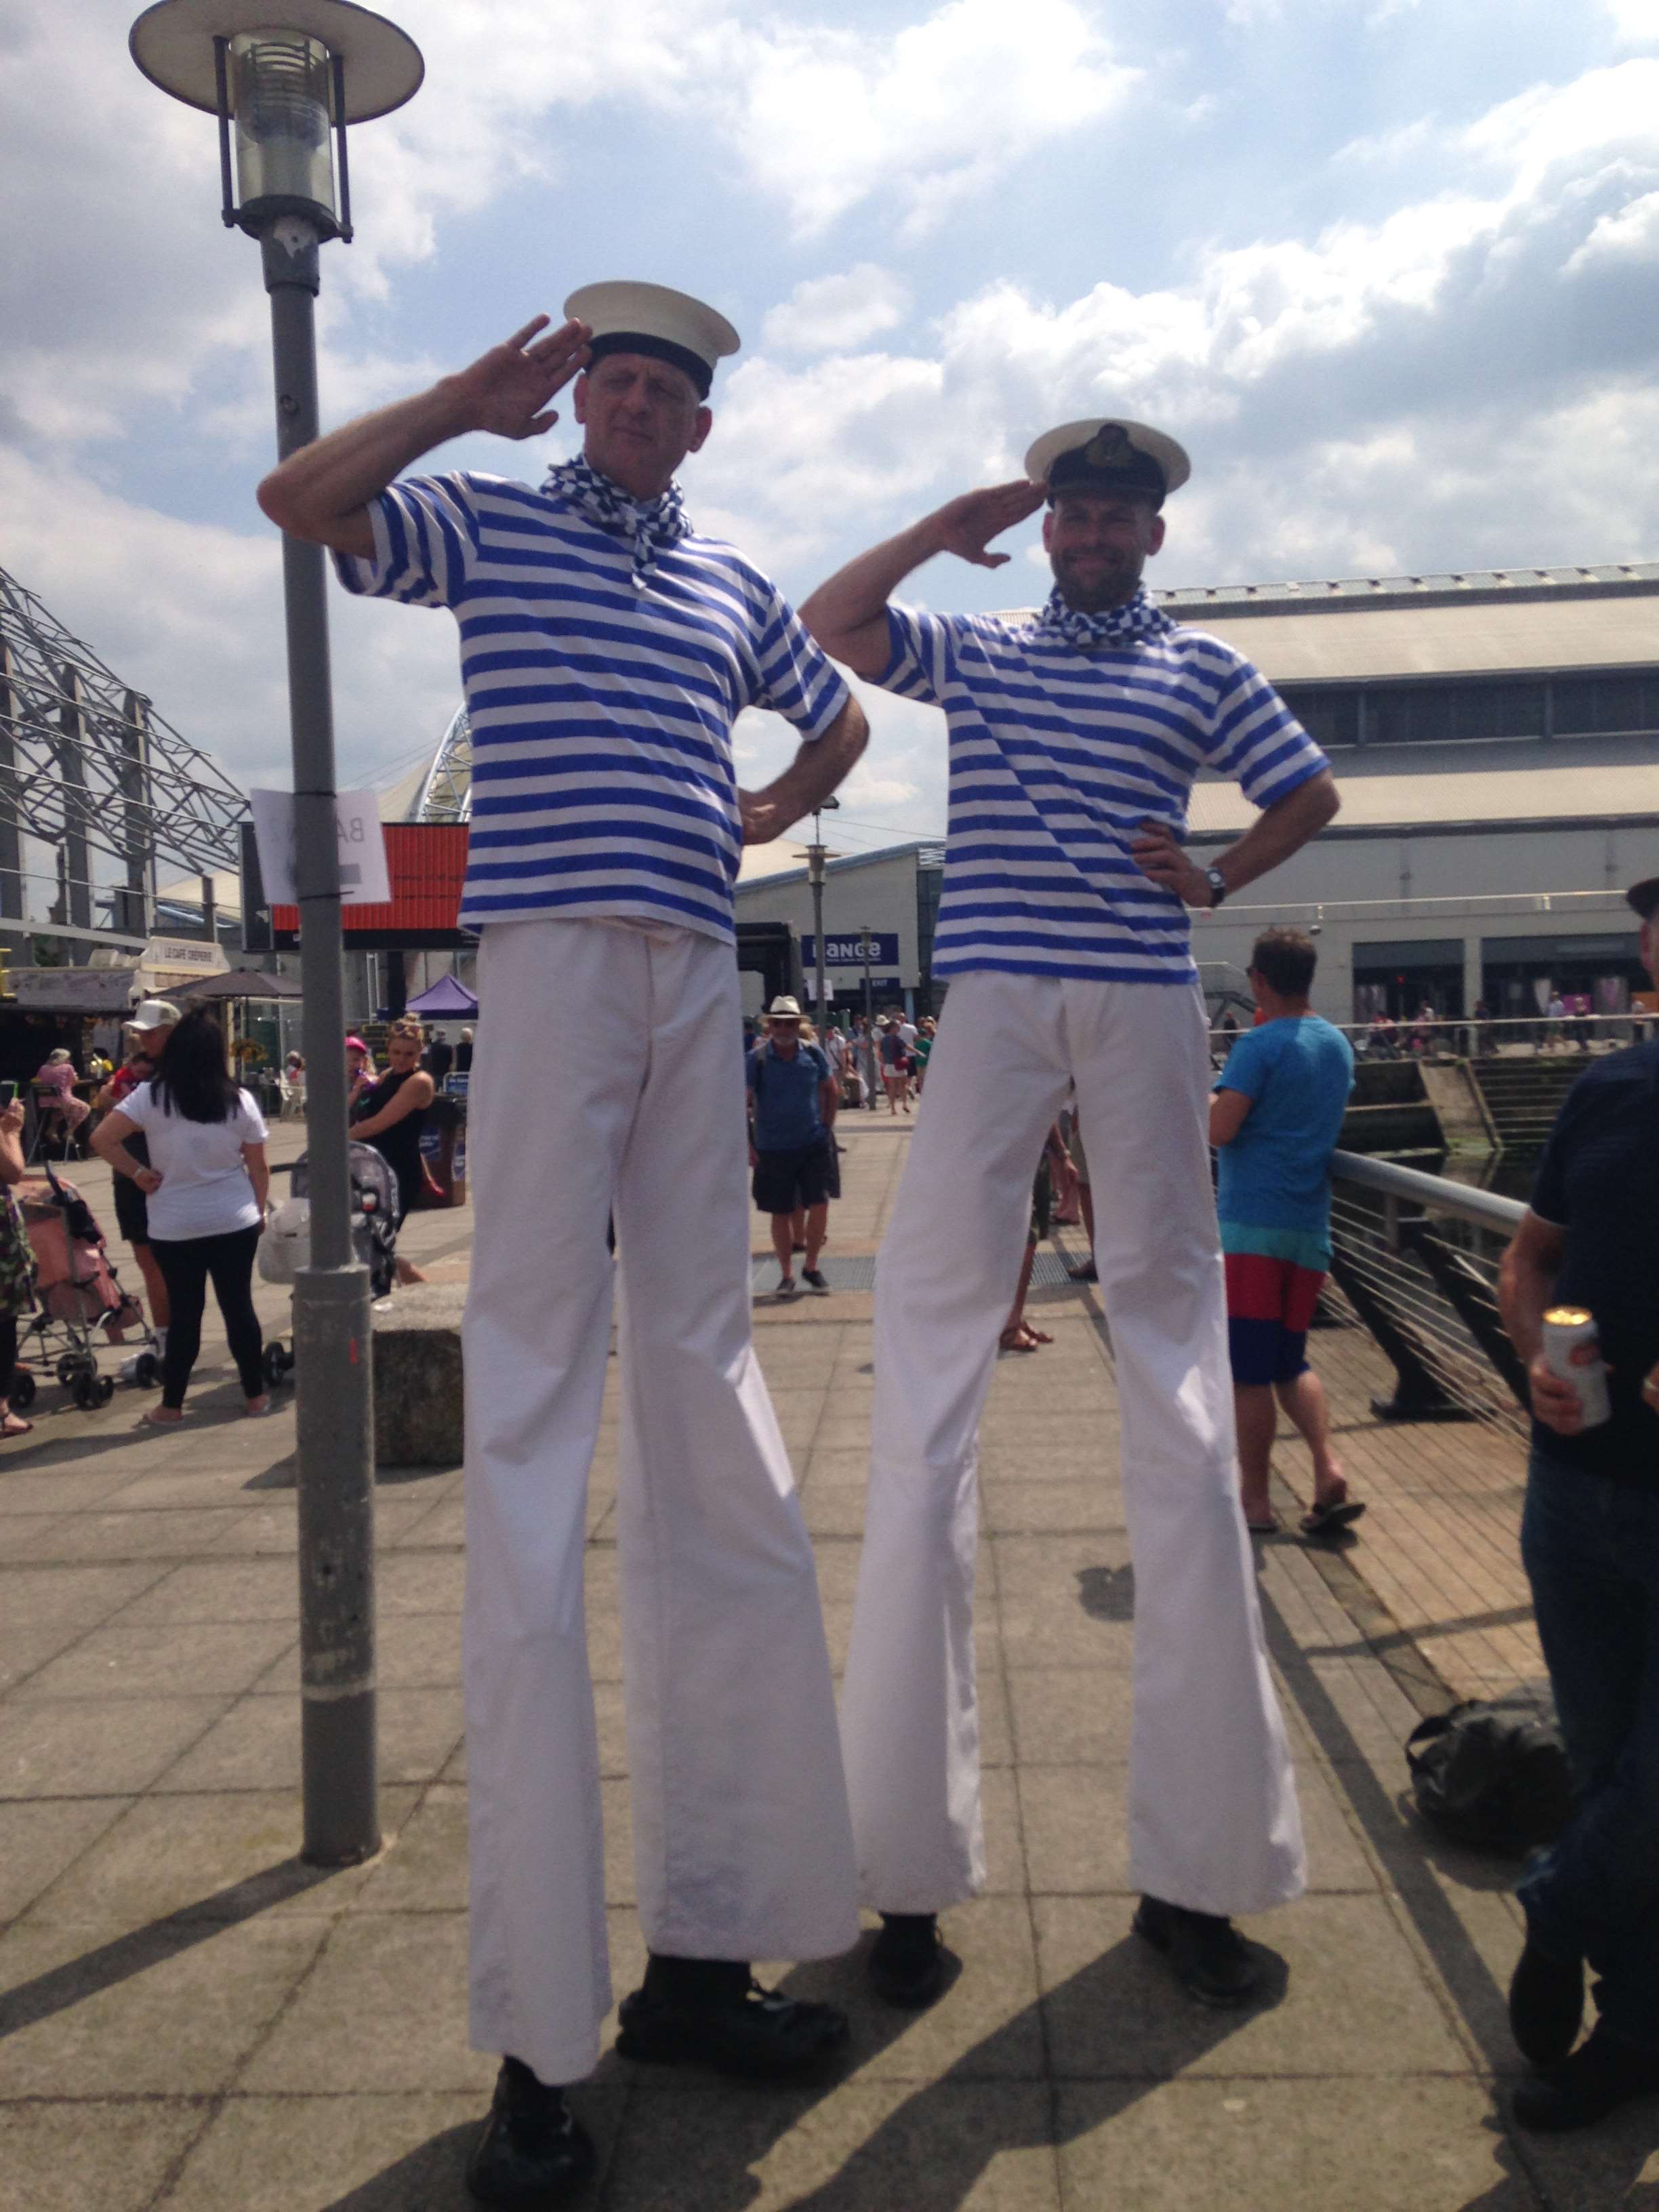 Very tall sailors have been spotted at the event.